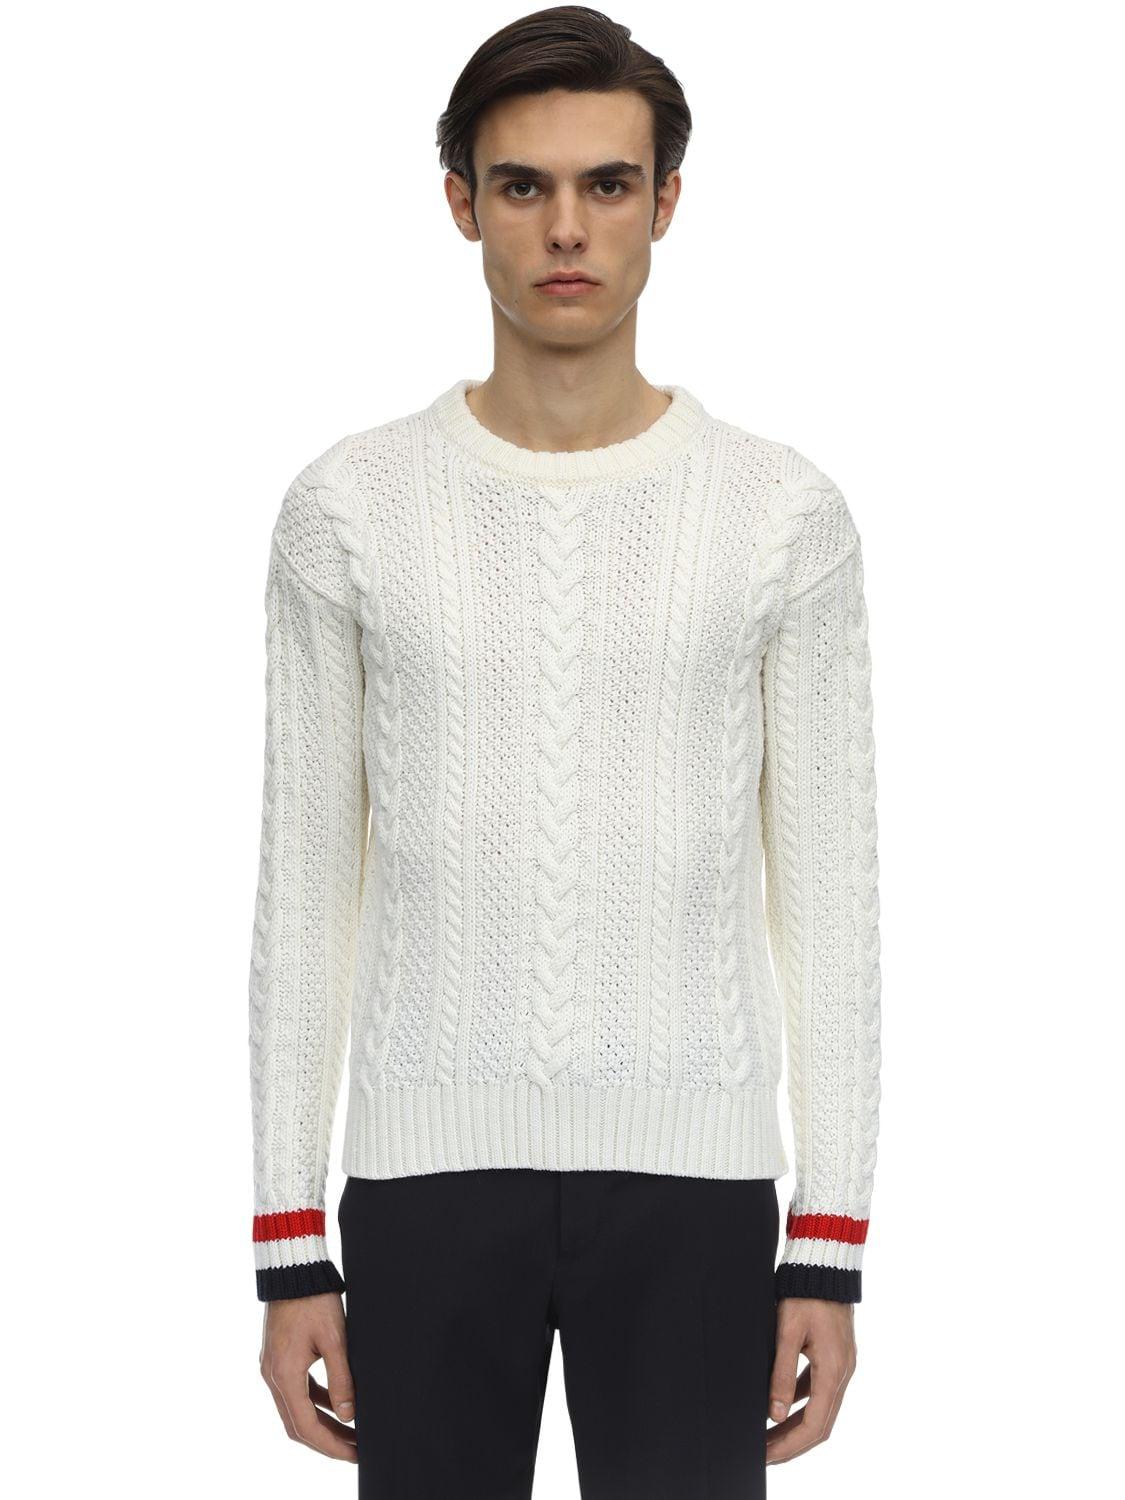 Thom Browne Aran Cable Knit Wool Crewneck Sweater in White for Men ...